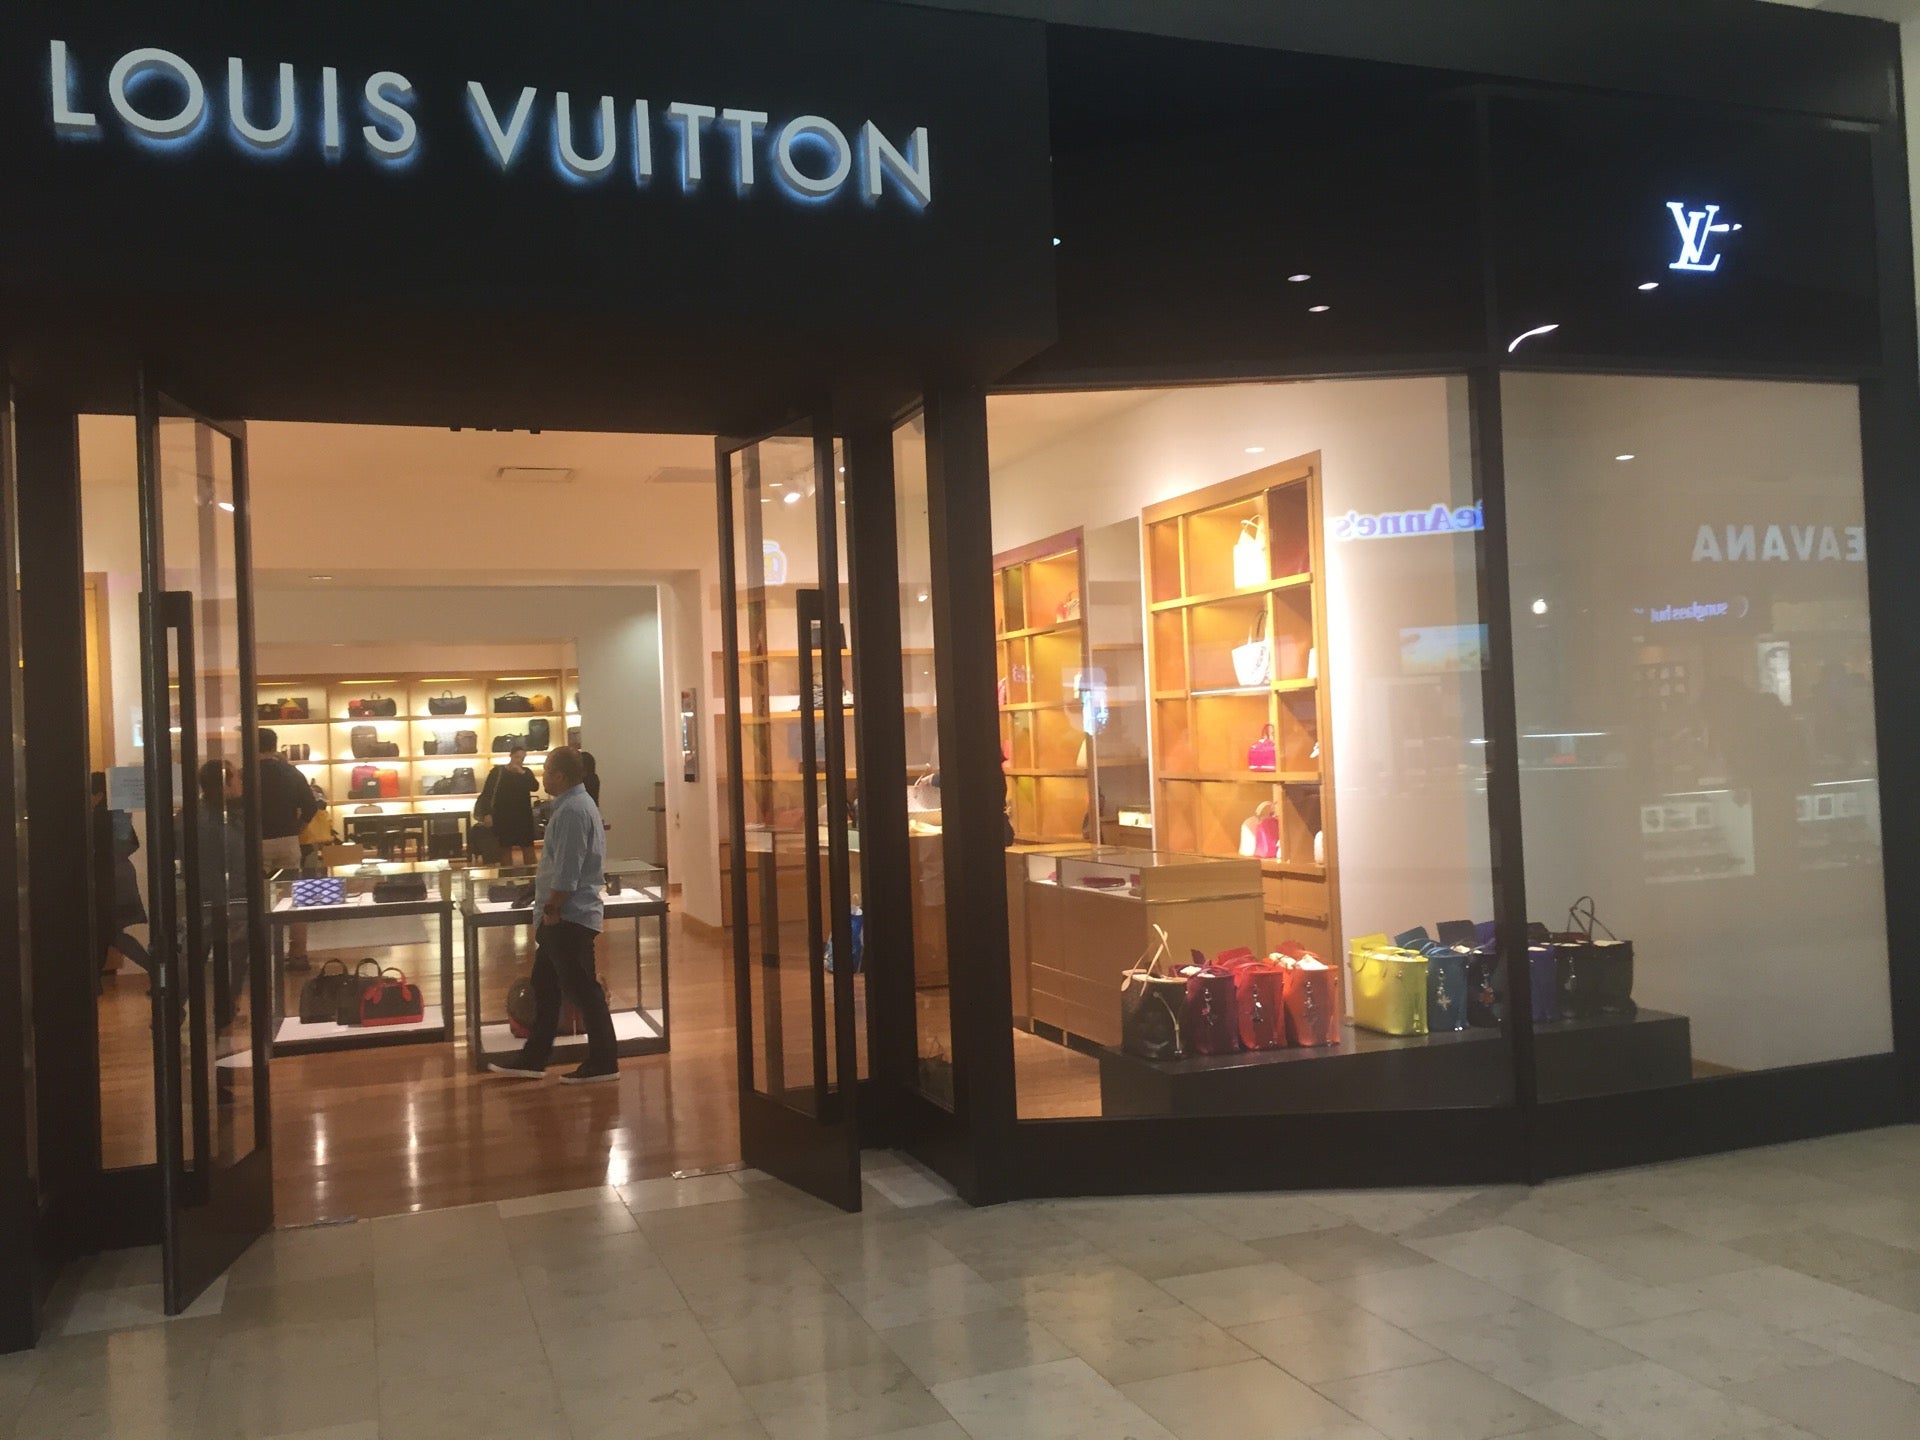 LOUIS VUITTON CHARLOTTE SOUTHPARK - 53 Photos & 64 Reviews - 4400 Mall  Southpark Sharon Rd, Charlotte, North Carolina - Accessories - Phone Number  - Yelp